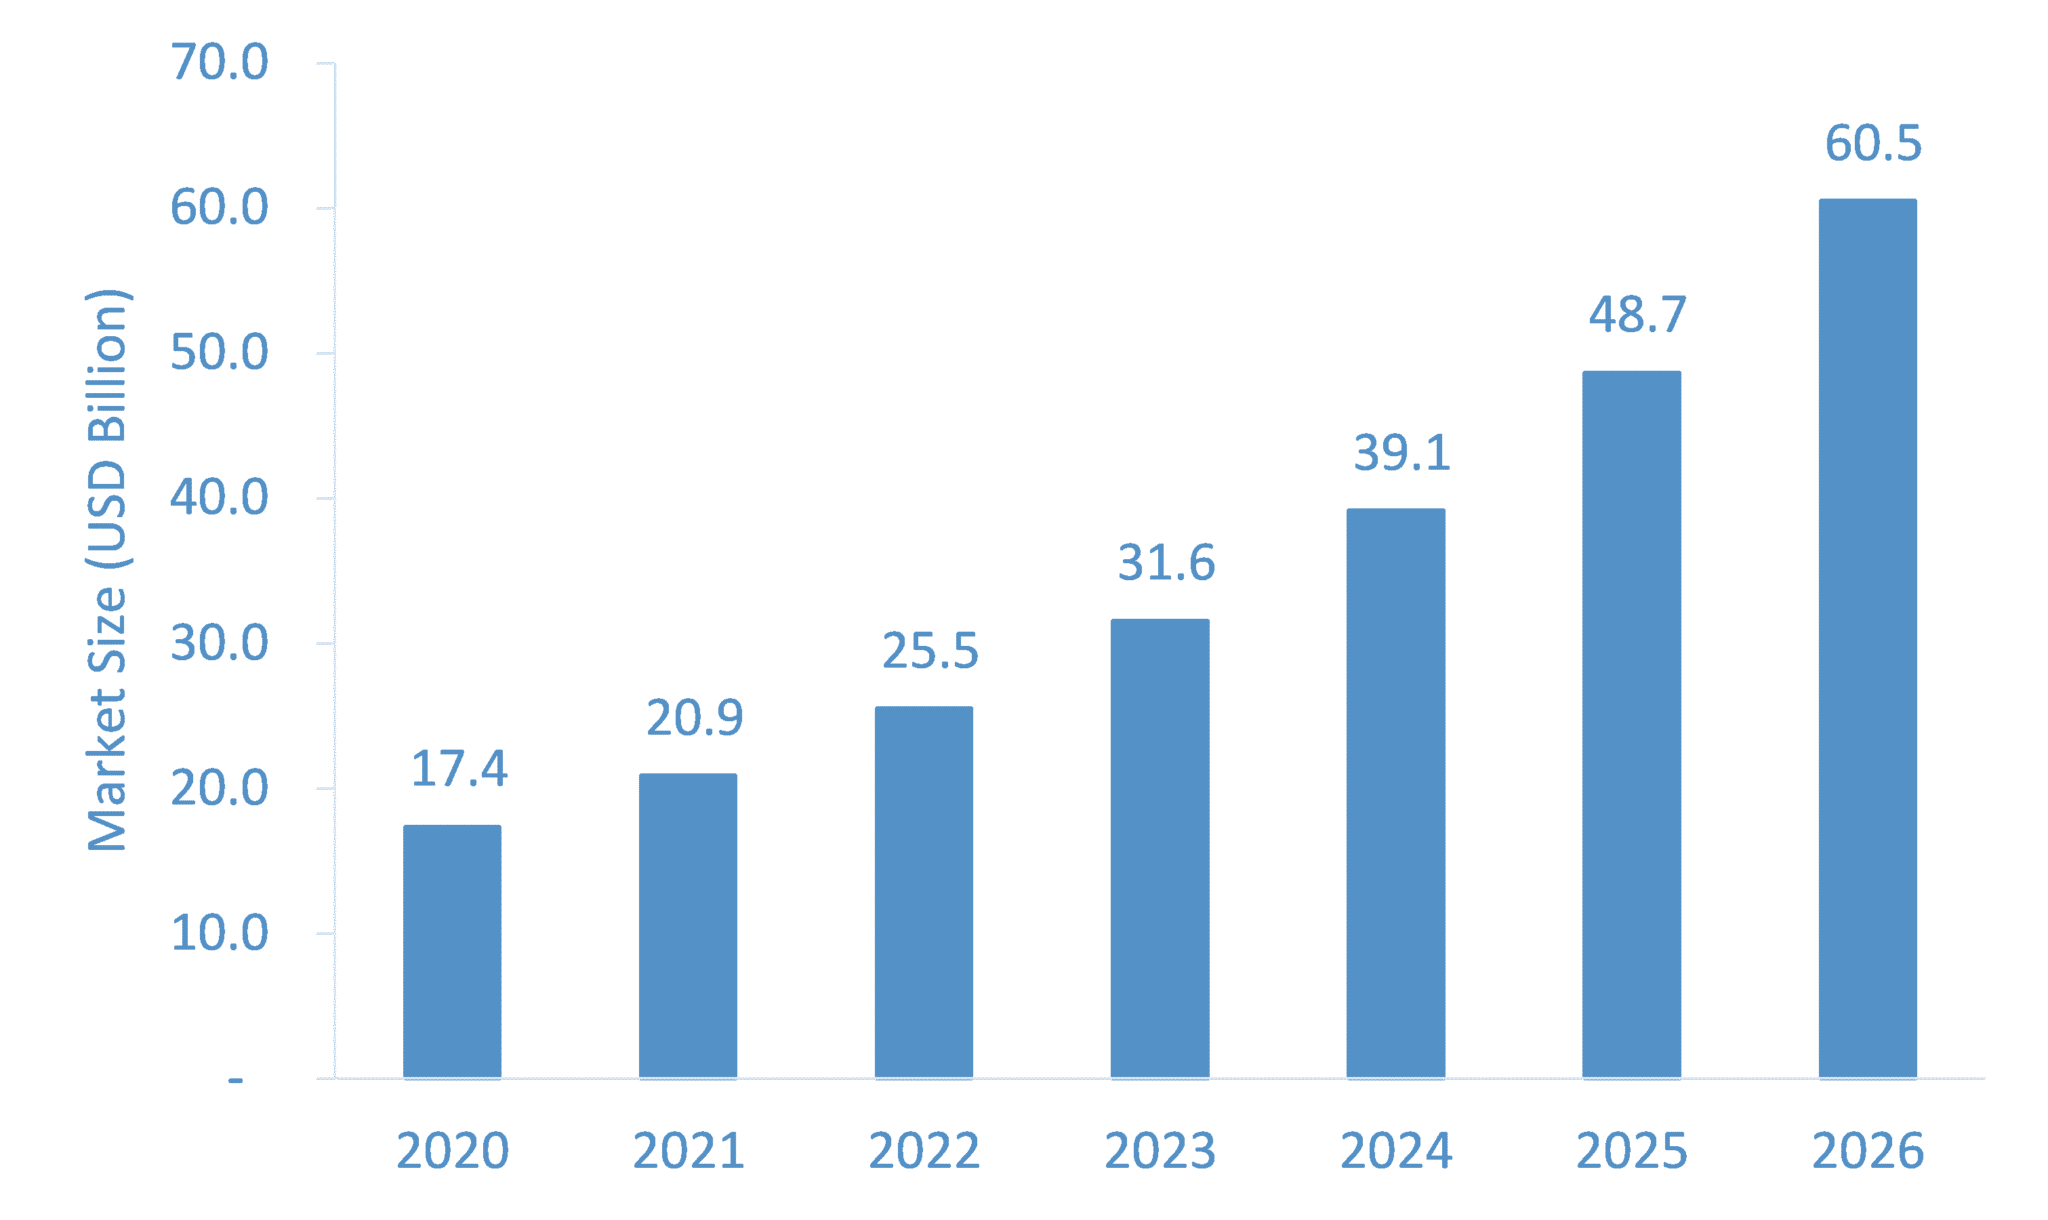 Wearable-Medical-Devices-Market-Forecast_51571-4f2e92ff